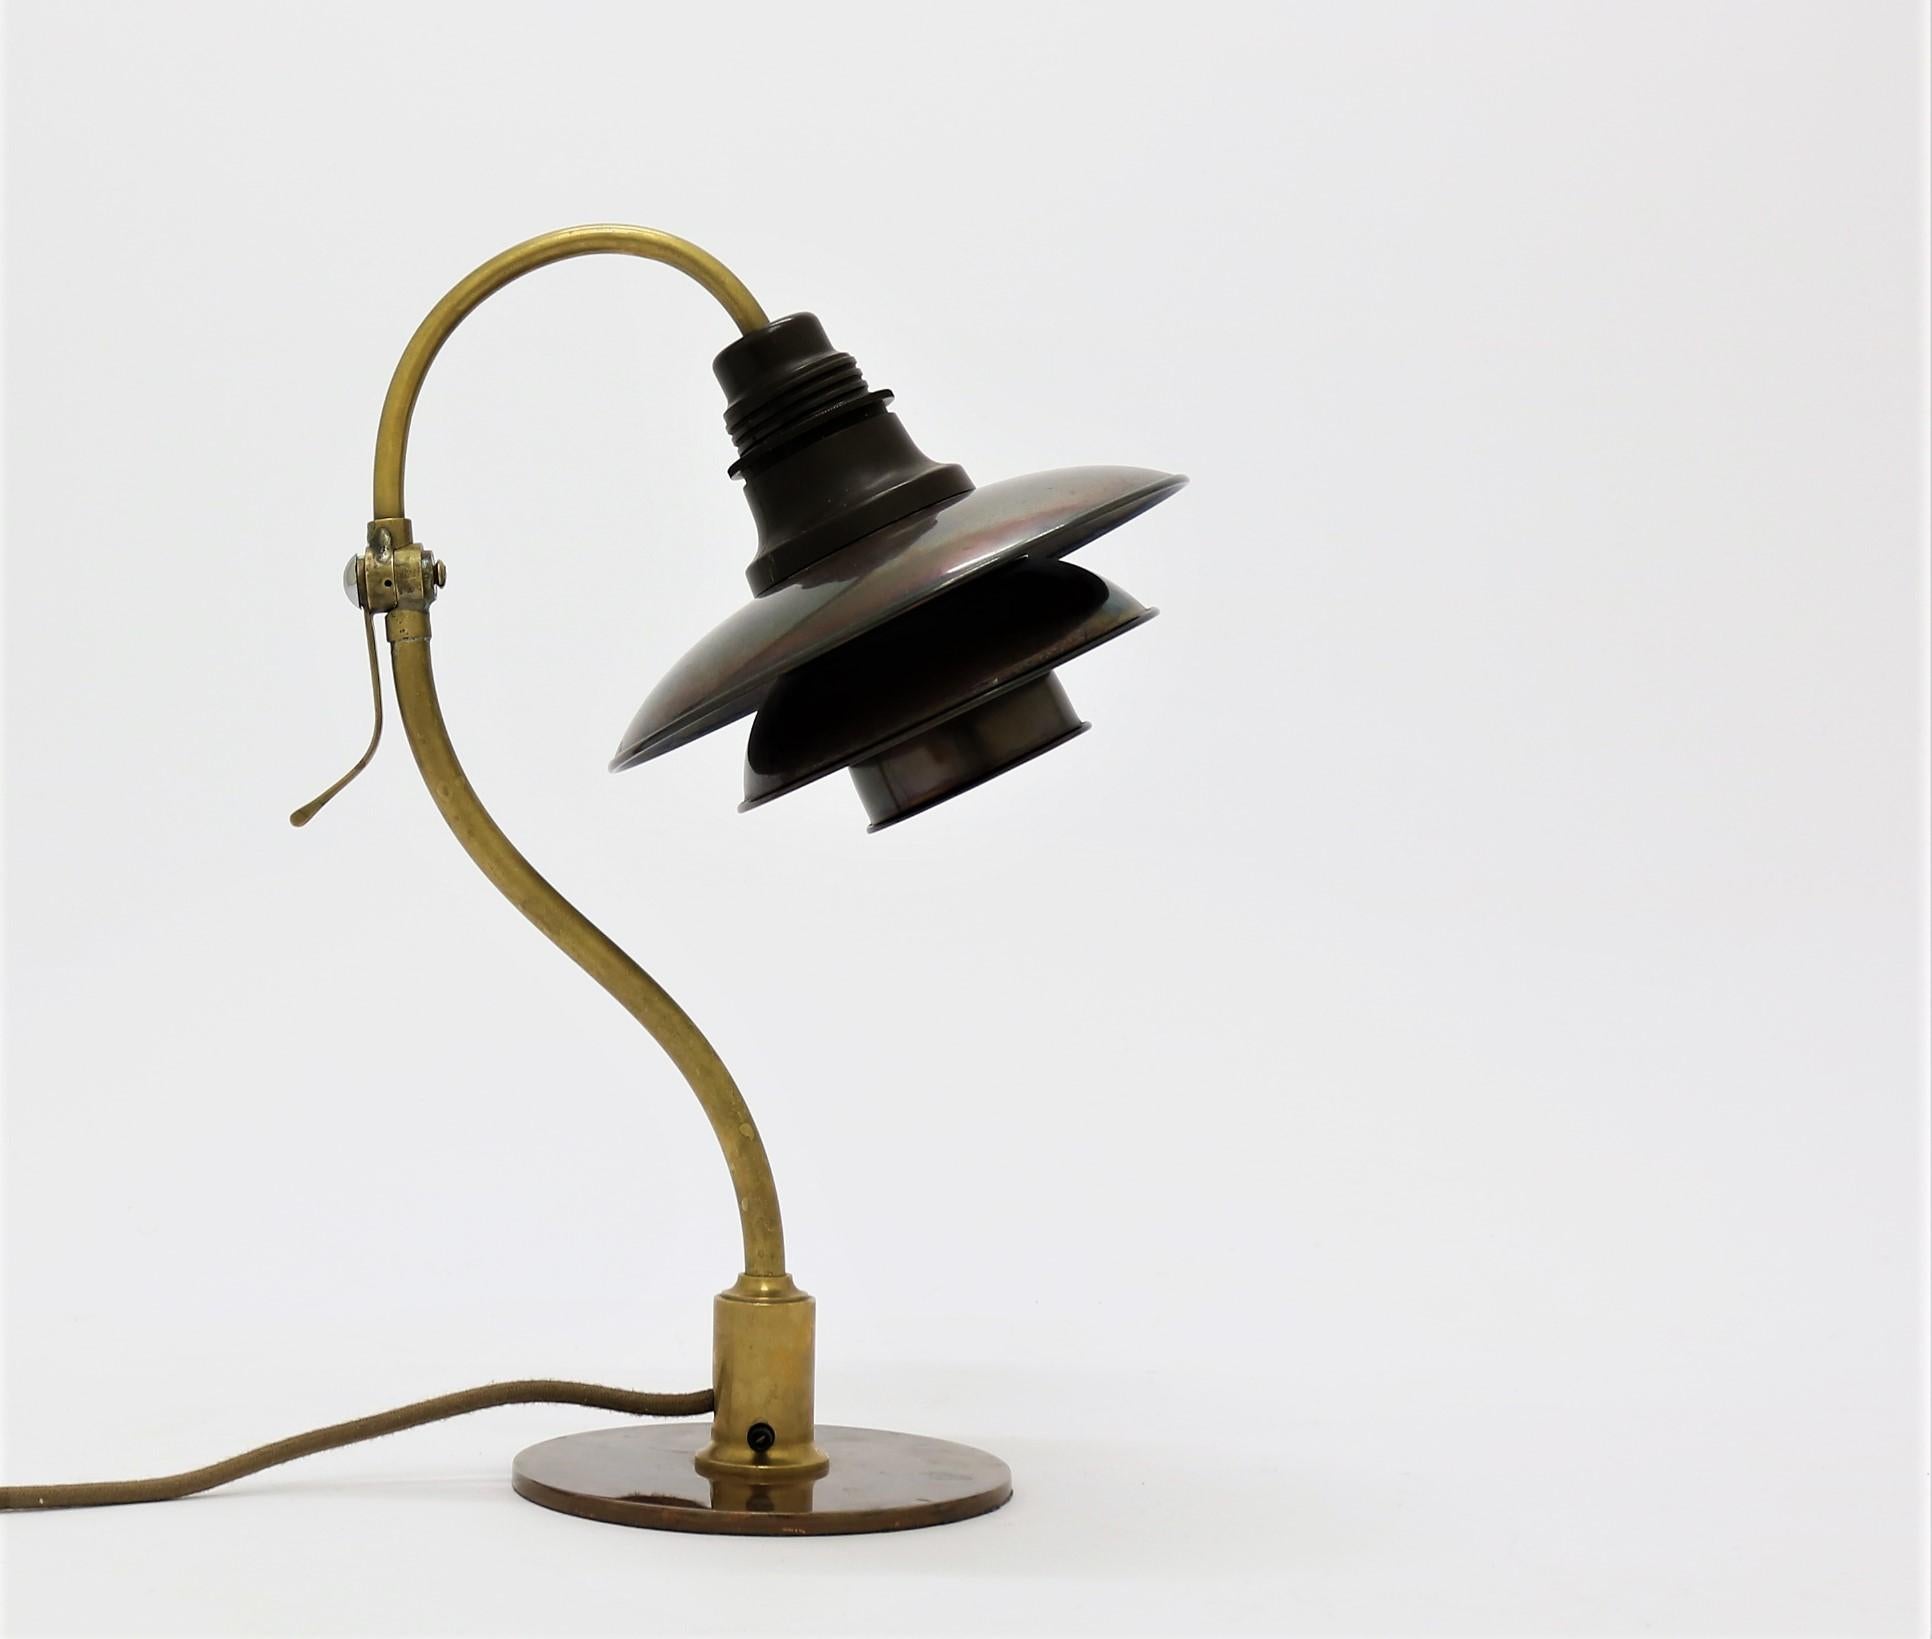 Rare and stunning desk lamp by iconic Danish designer Poul Henningsen from the 1930s. The base is made from beautifully patinated brass and copper and the 2/2 shades from dark and rich patinated copper. The lamp has never been restored and all parts